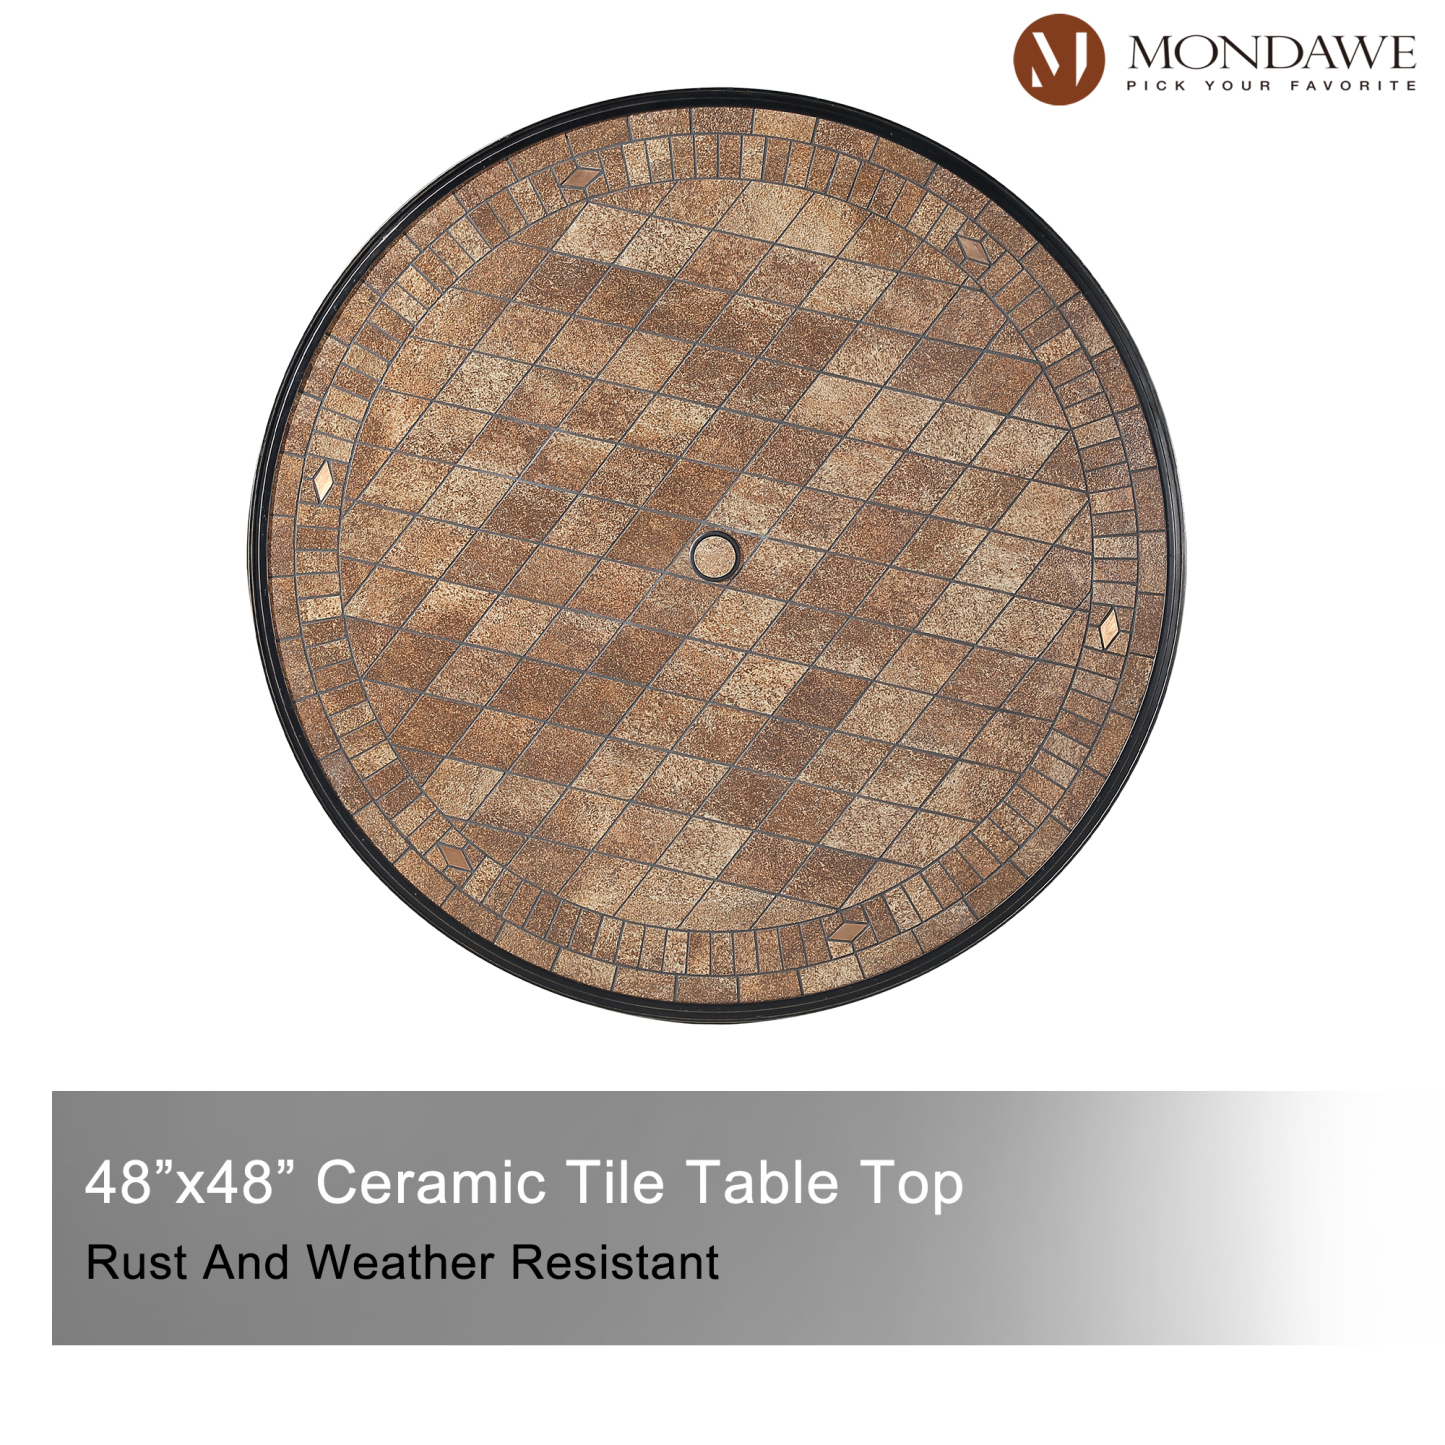 Classic 5-Piece Cast Aluminum Outdoor Dining Set with Swivel Sling Chairs & Ceramic Tile Top Table-Mondawe